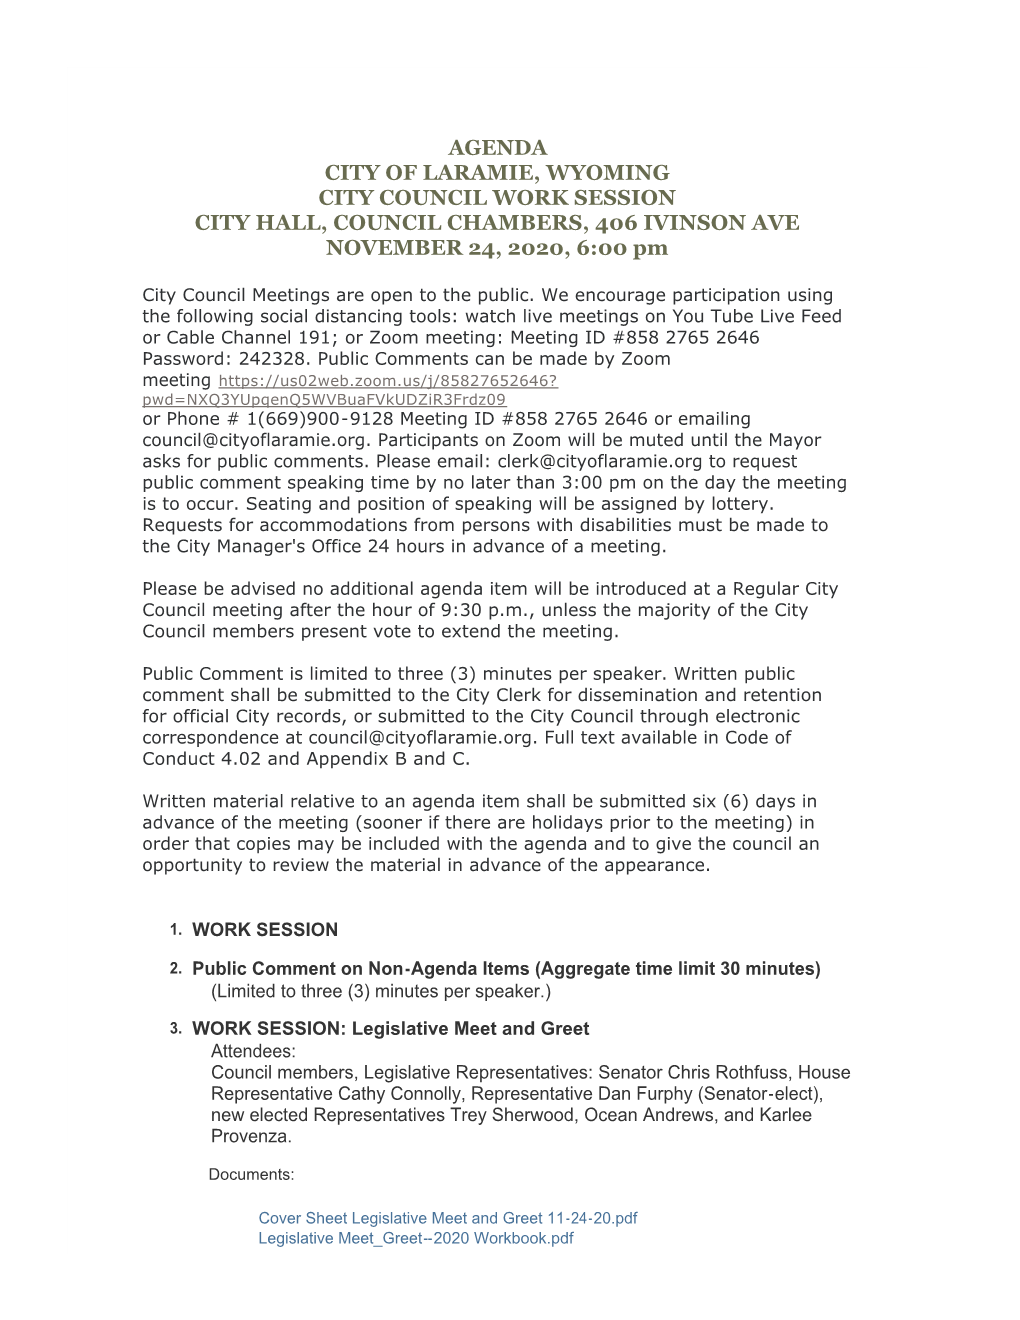 AGENDA CITY of LARAMIE, WYOMING CITY COUNCIL WORK SESSION CITY HALL, COUNCIL CHAMBERS, 406 IVINSON AVE NOVEMBER 24, 2020, 6:00 Pm